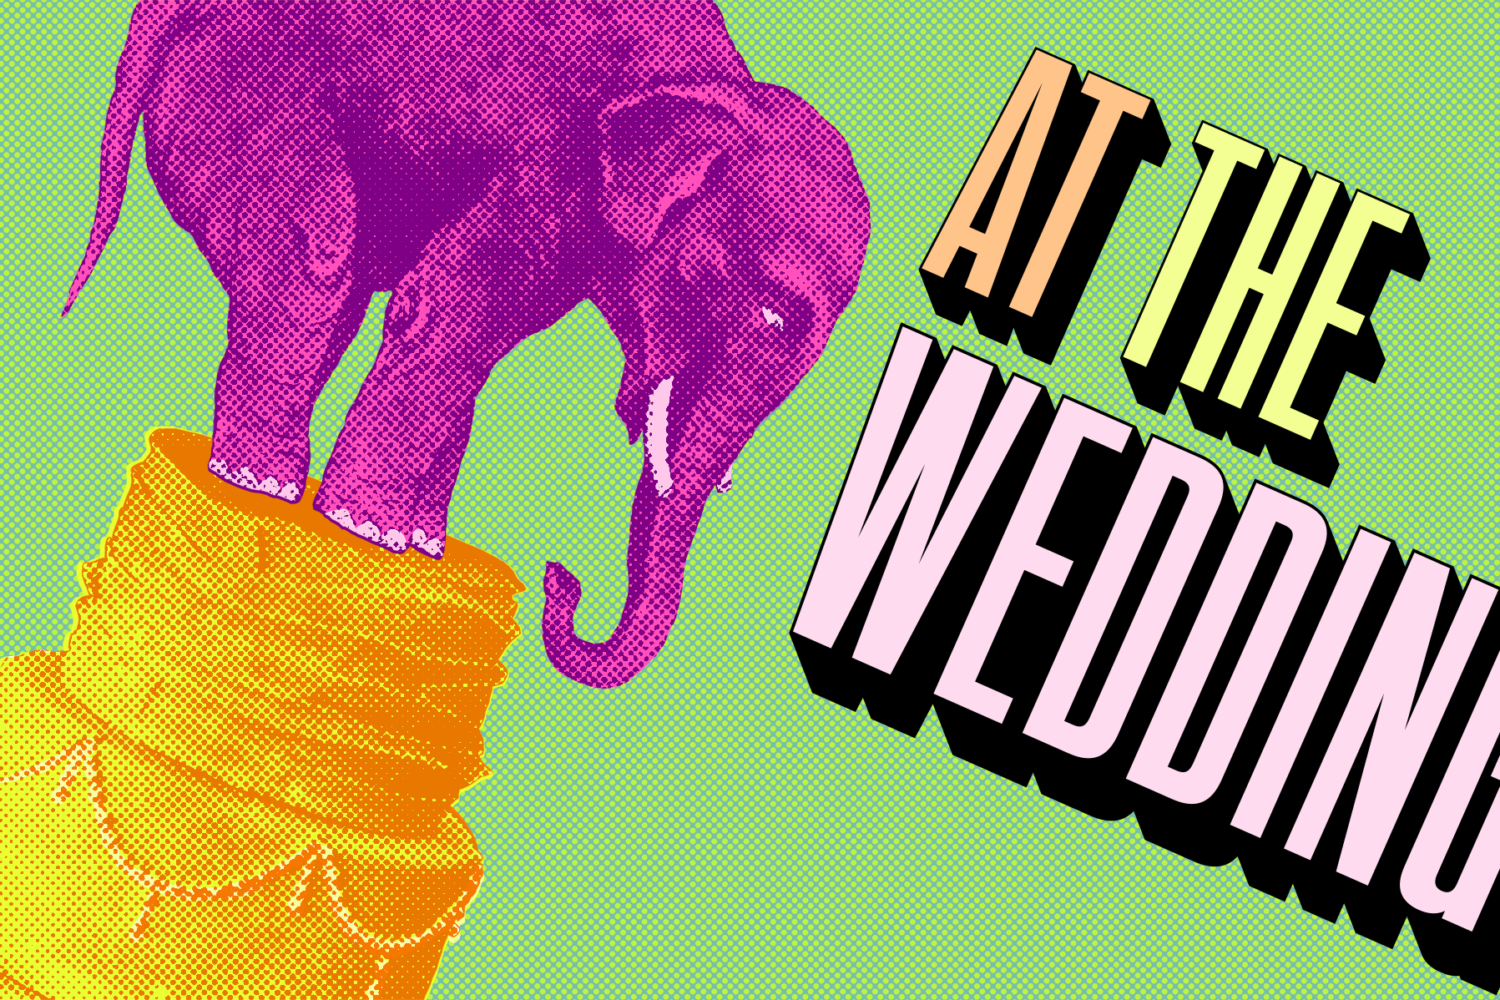 Chaos and Contemplation AT THE WEDDING in Studio’s New Comedy